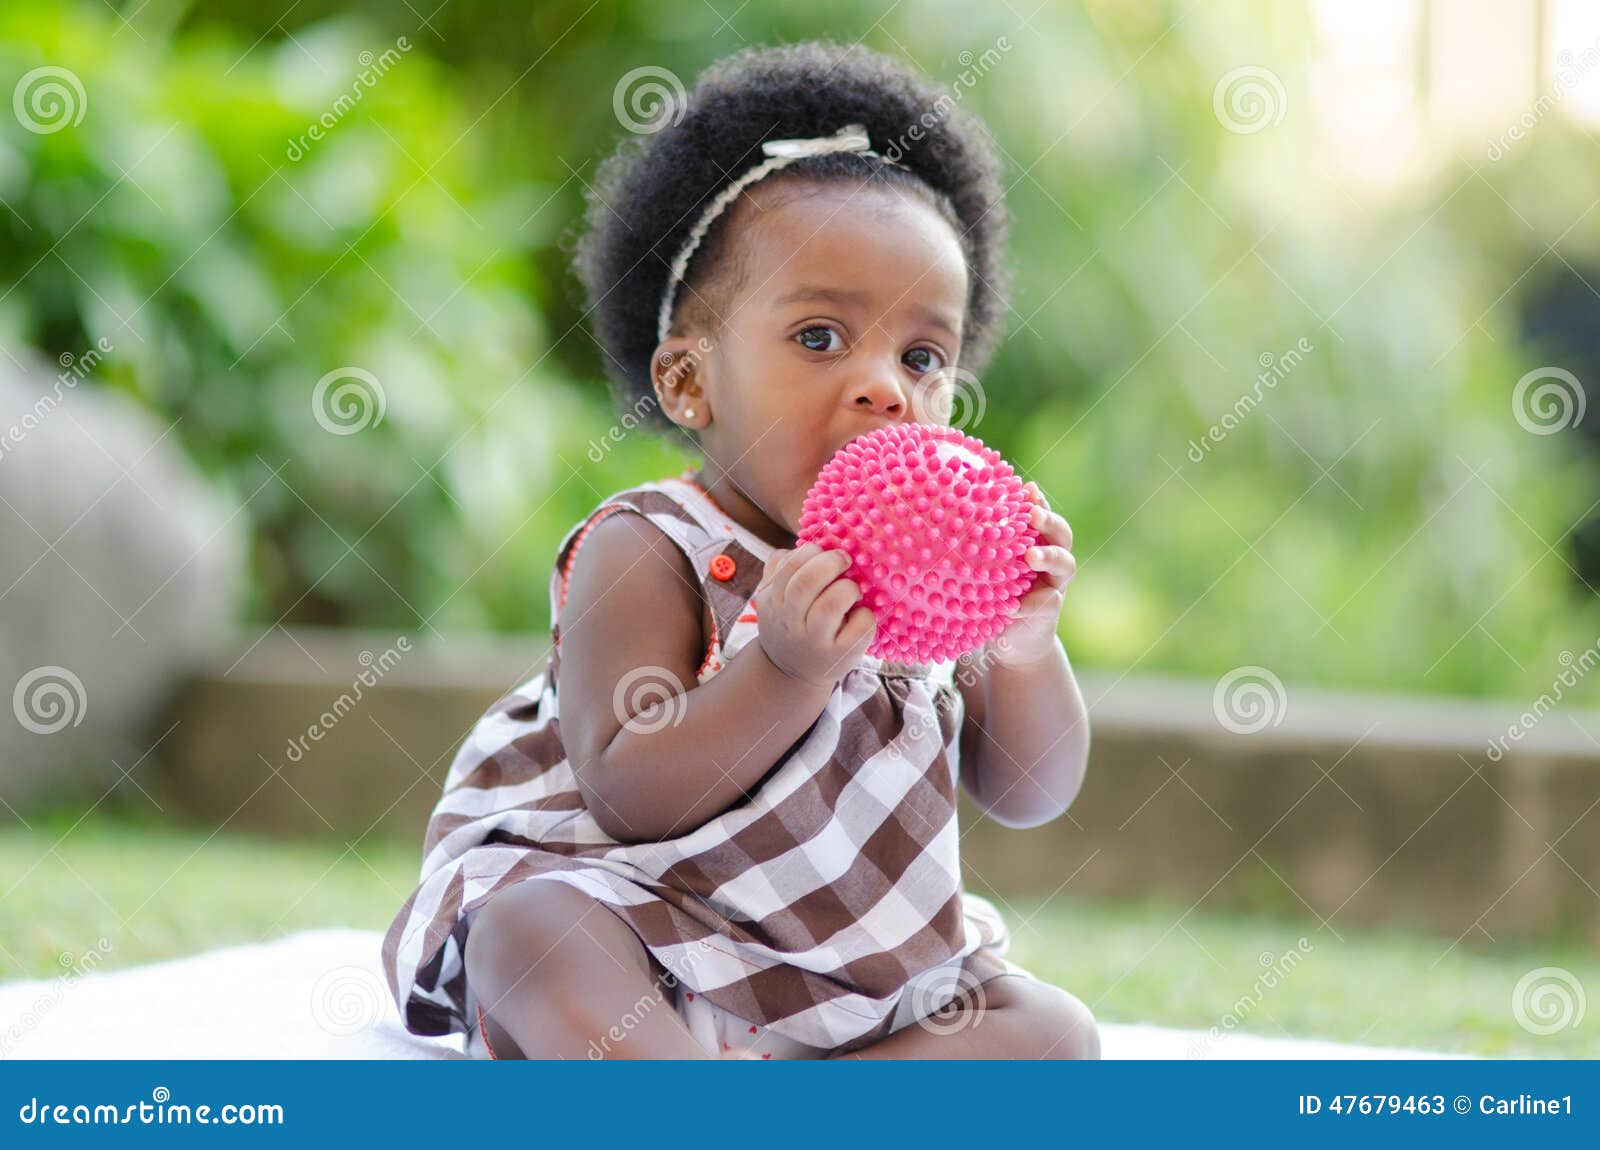 https://thumbs.dreamstime.com/z/cute-baby-portrait-african-american-playing-outdoors-ball-47679463.jpg